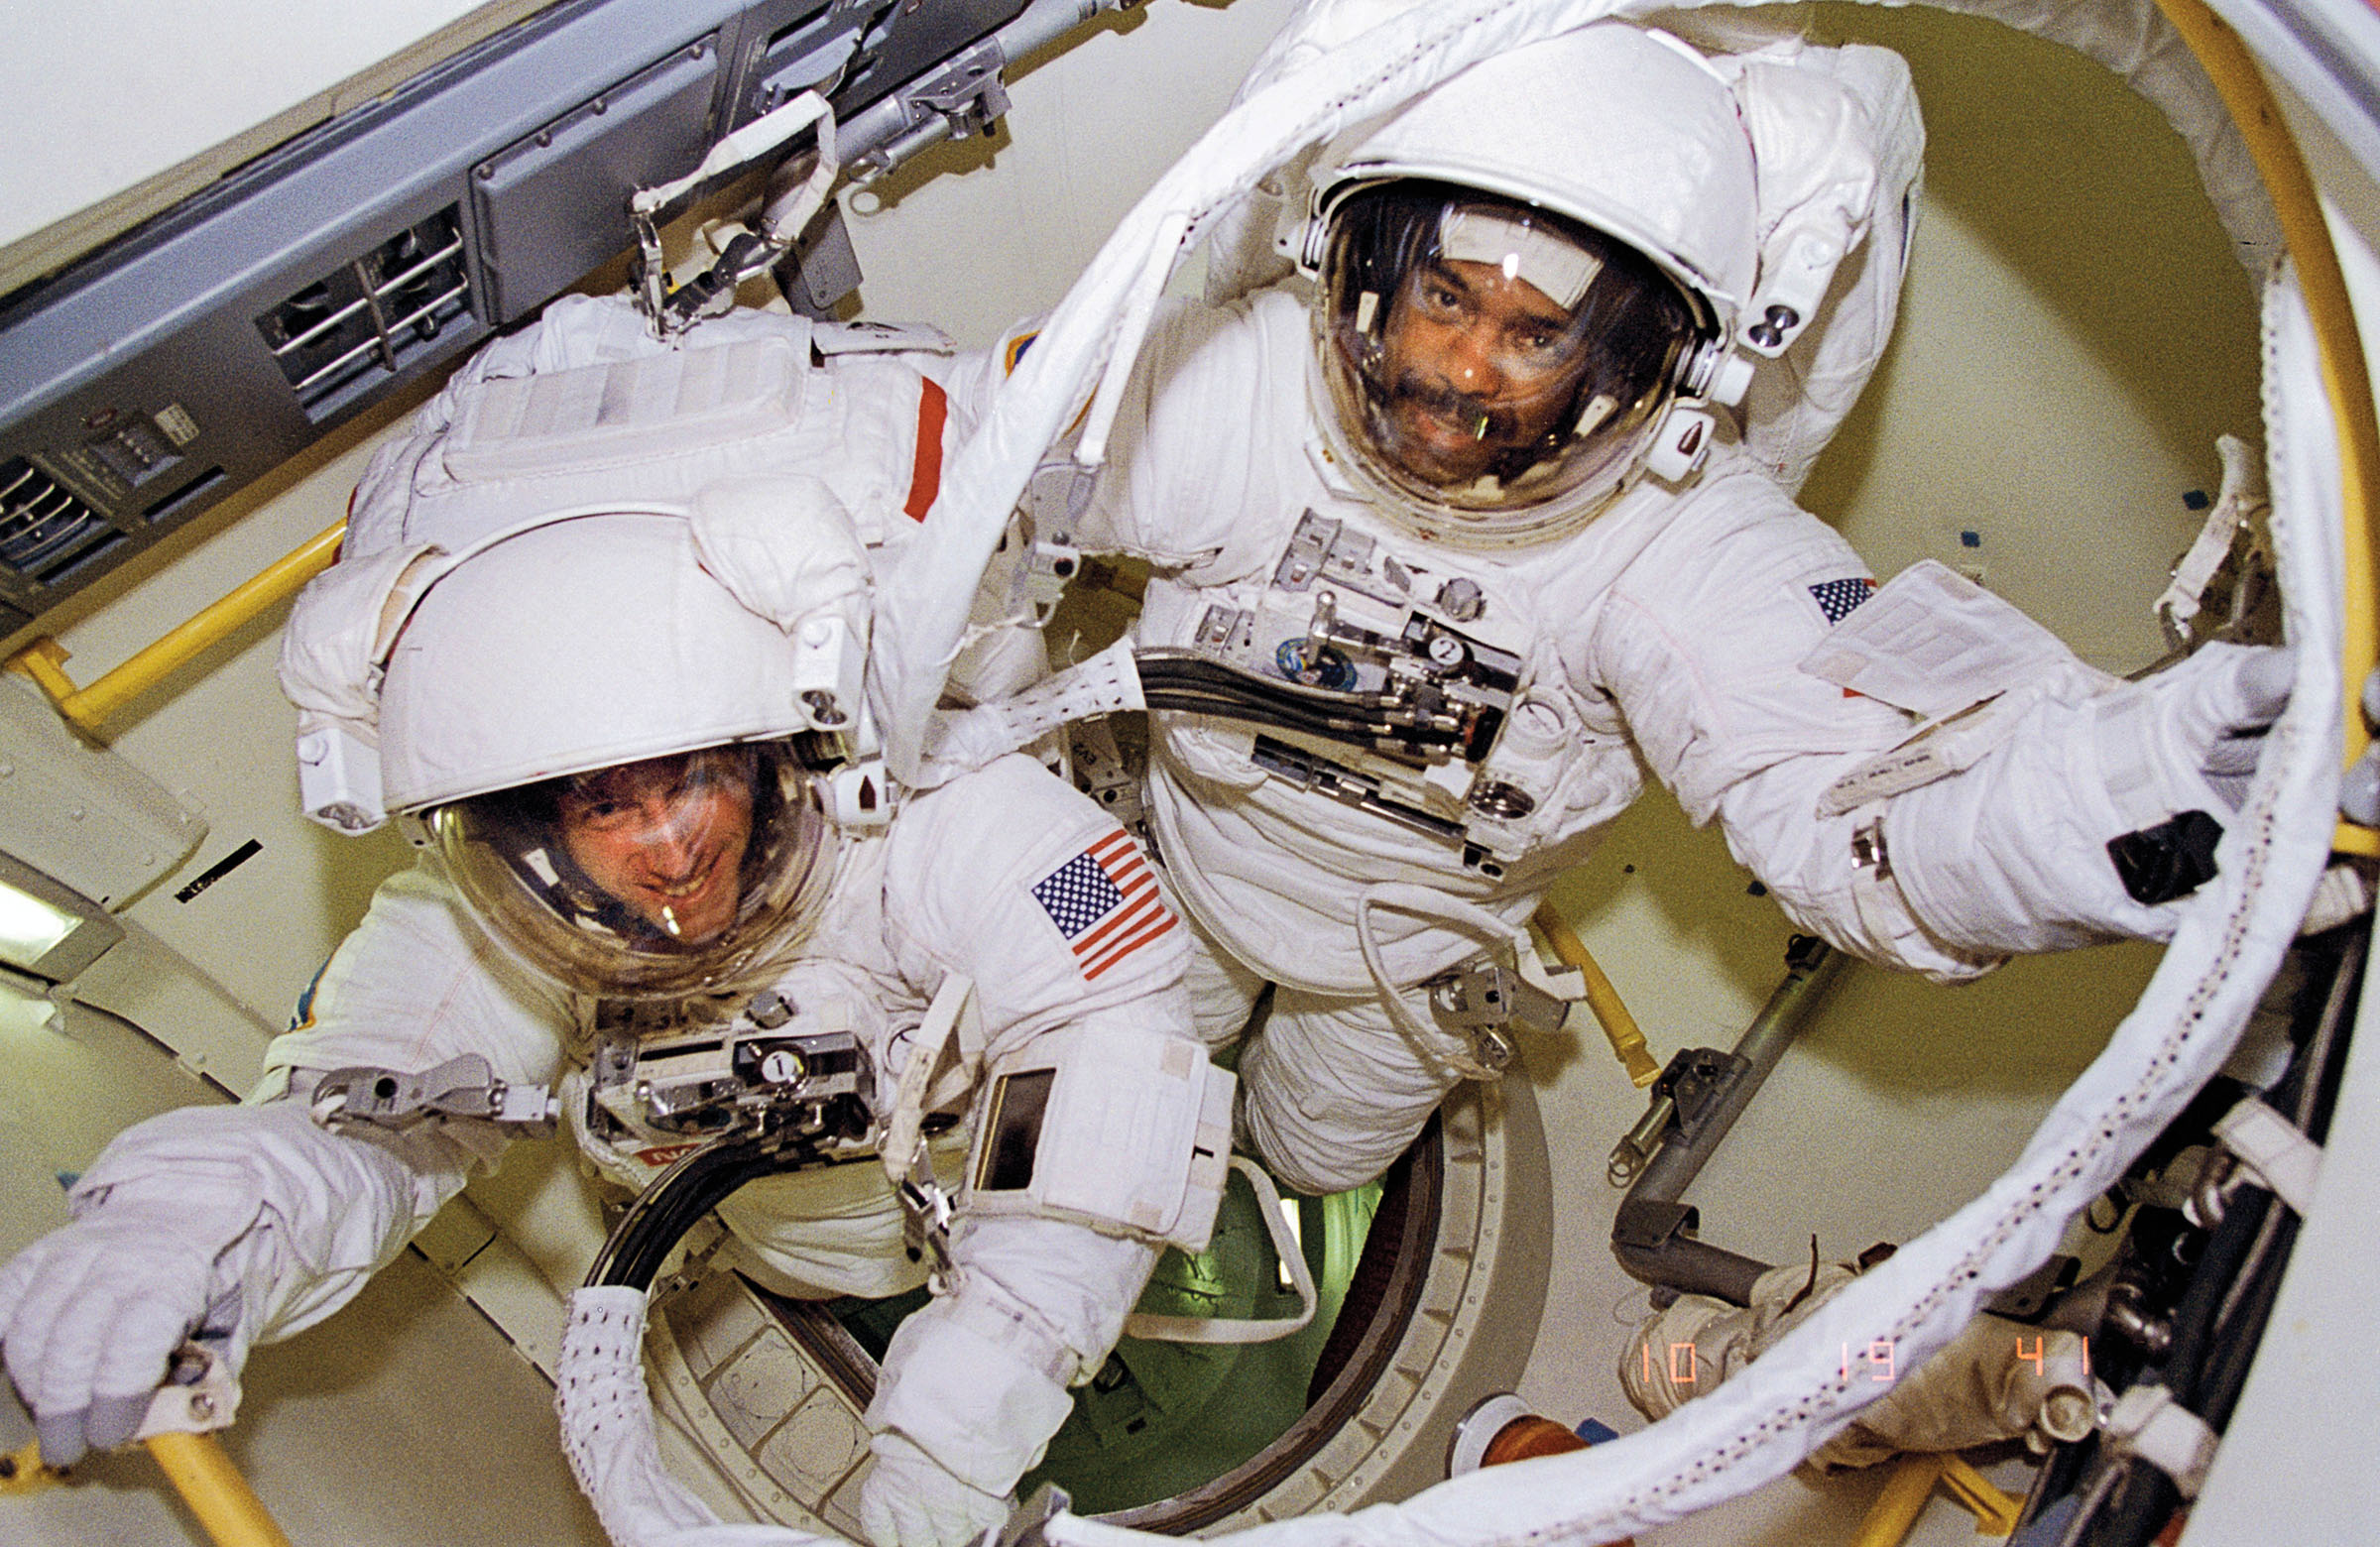 Astronauts in space suits inside of a capsule look up and smile at the camera